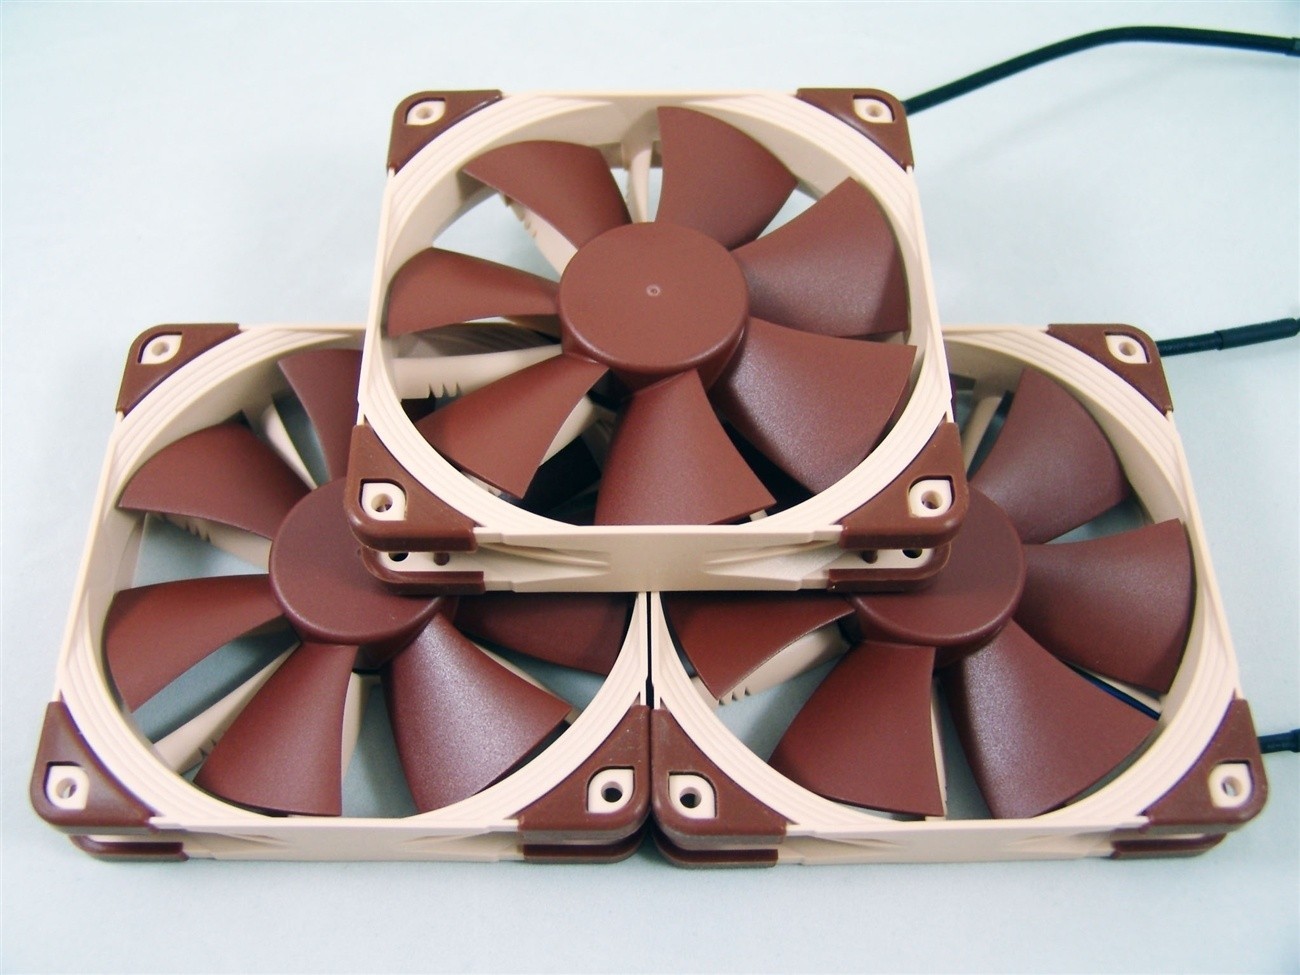 Noctua NF-F12 PWM Focused Cooling Fan Review